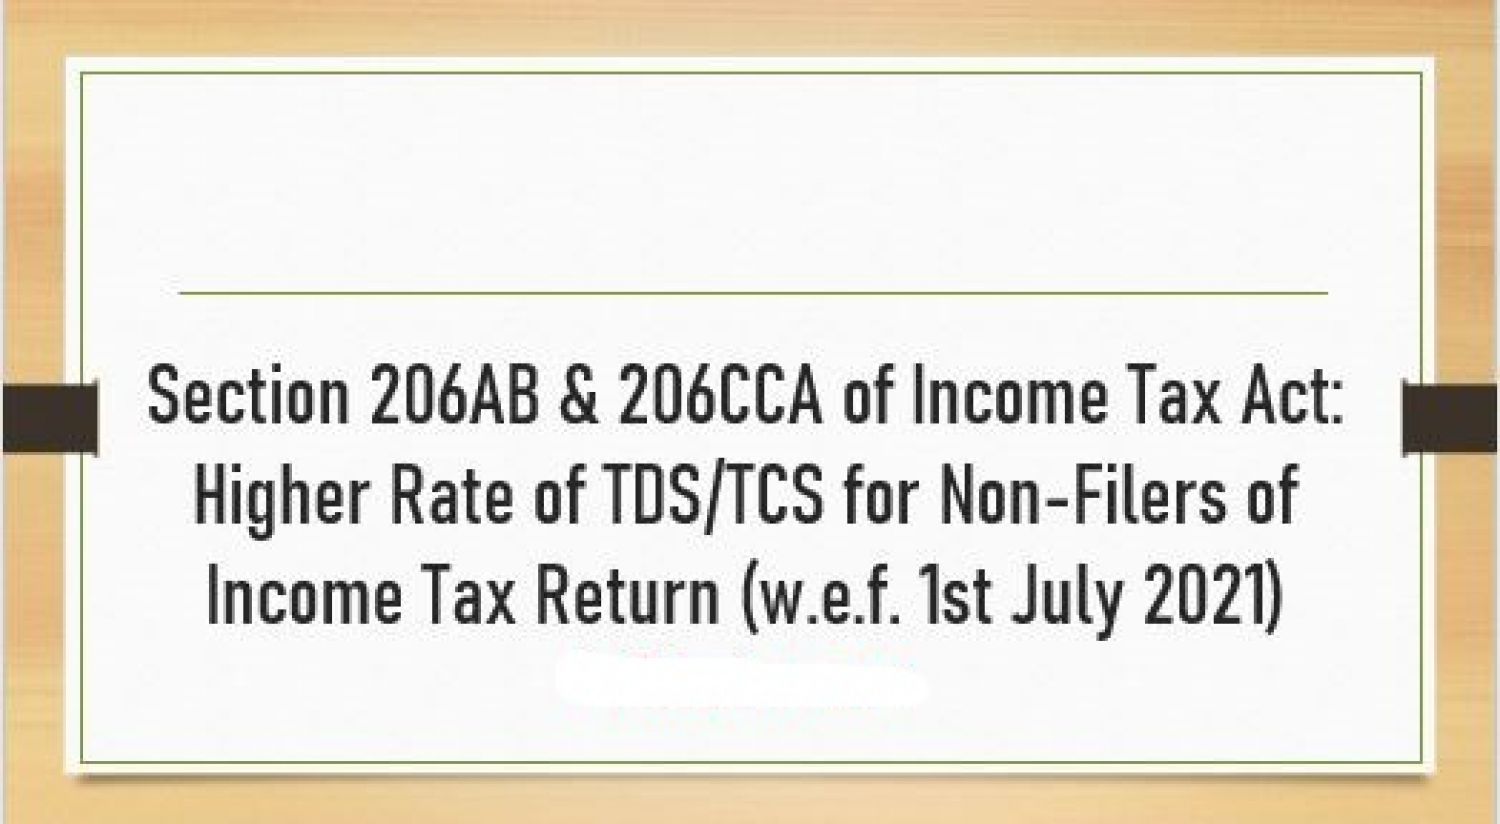 TDS/TCS | Non-Filers of Income Tax Return: Analysis of Sections 206AB and 206CCA